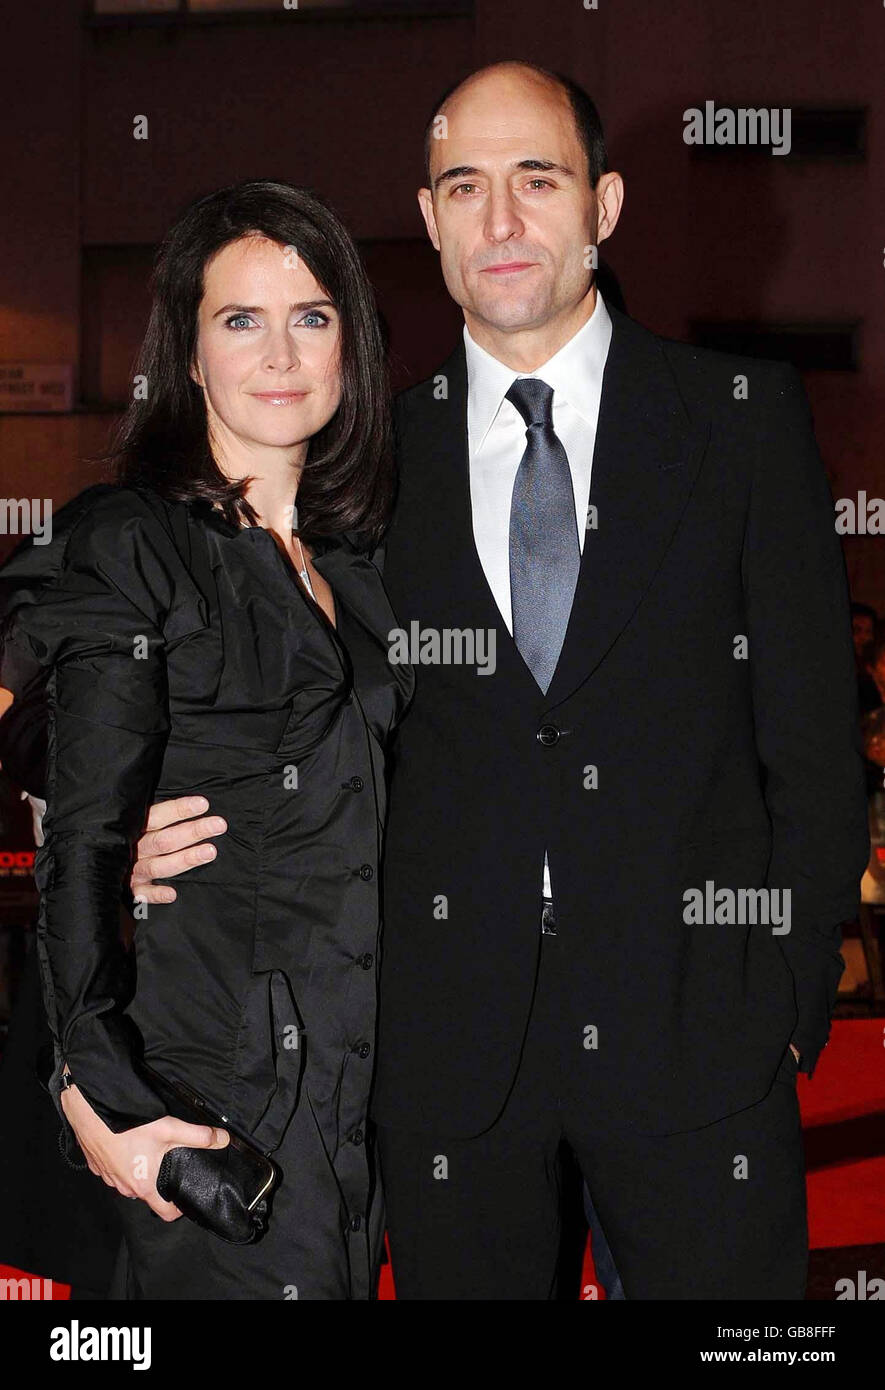 British actor Mark Strong with partner Liza at the UK film premiere of 'Body of Lies' at the Vue West End, in central London. Stock Photo